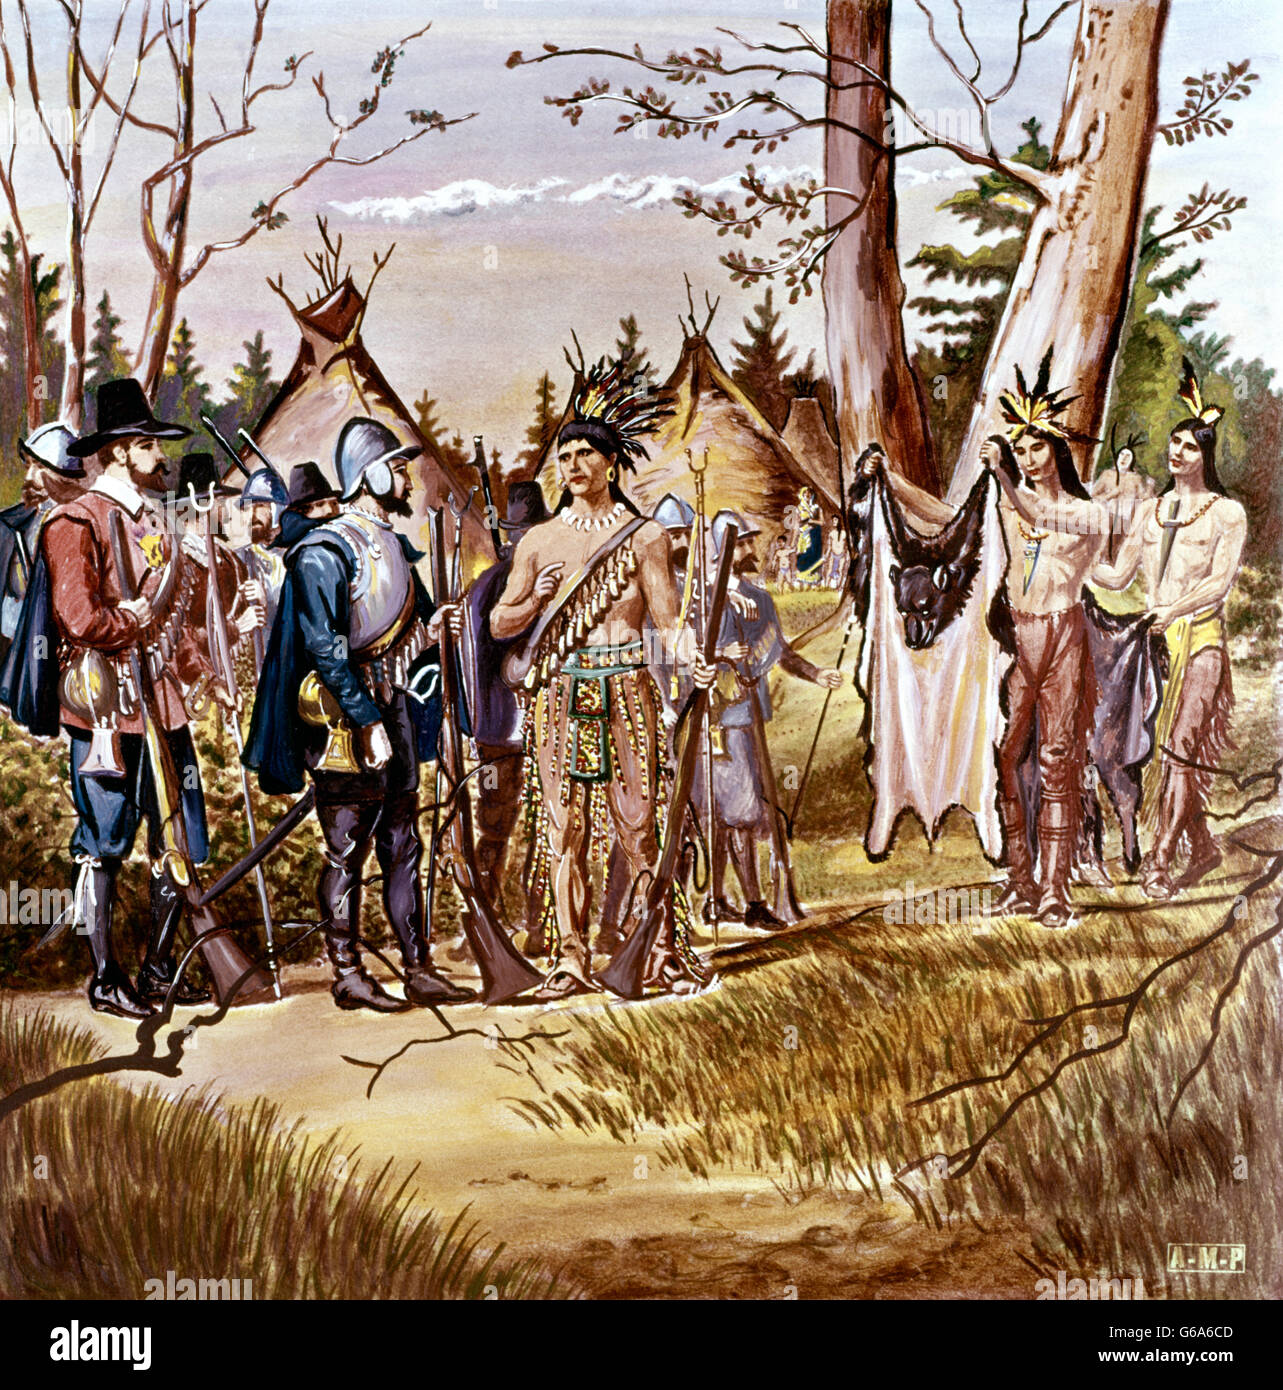 1620s 1621 ILLUSTRATION ANTIQUE GLASS LANTERN SLIDE MILES STANDISH MEETING THE INDIANS IN COLONIAL PLYMOUTH, MA Stock Photo